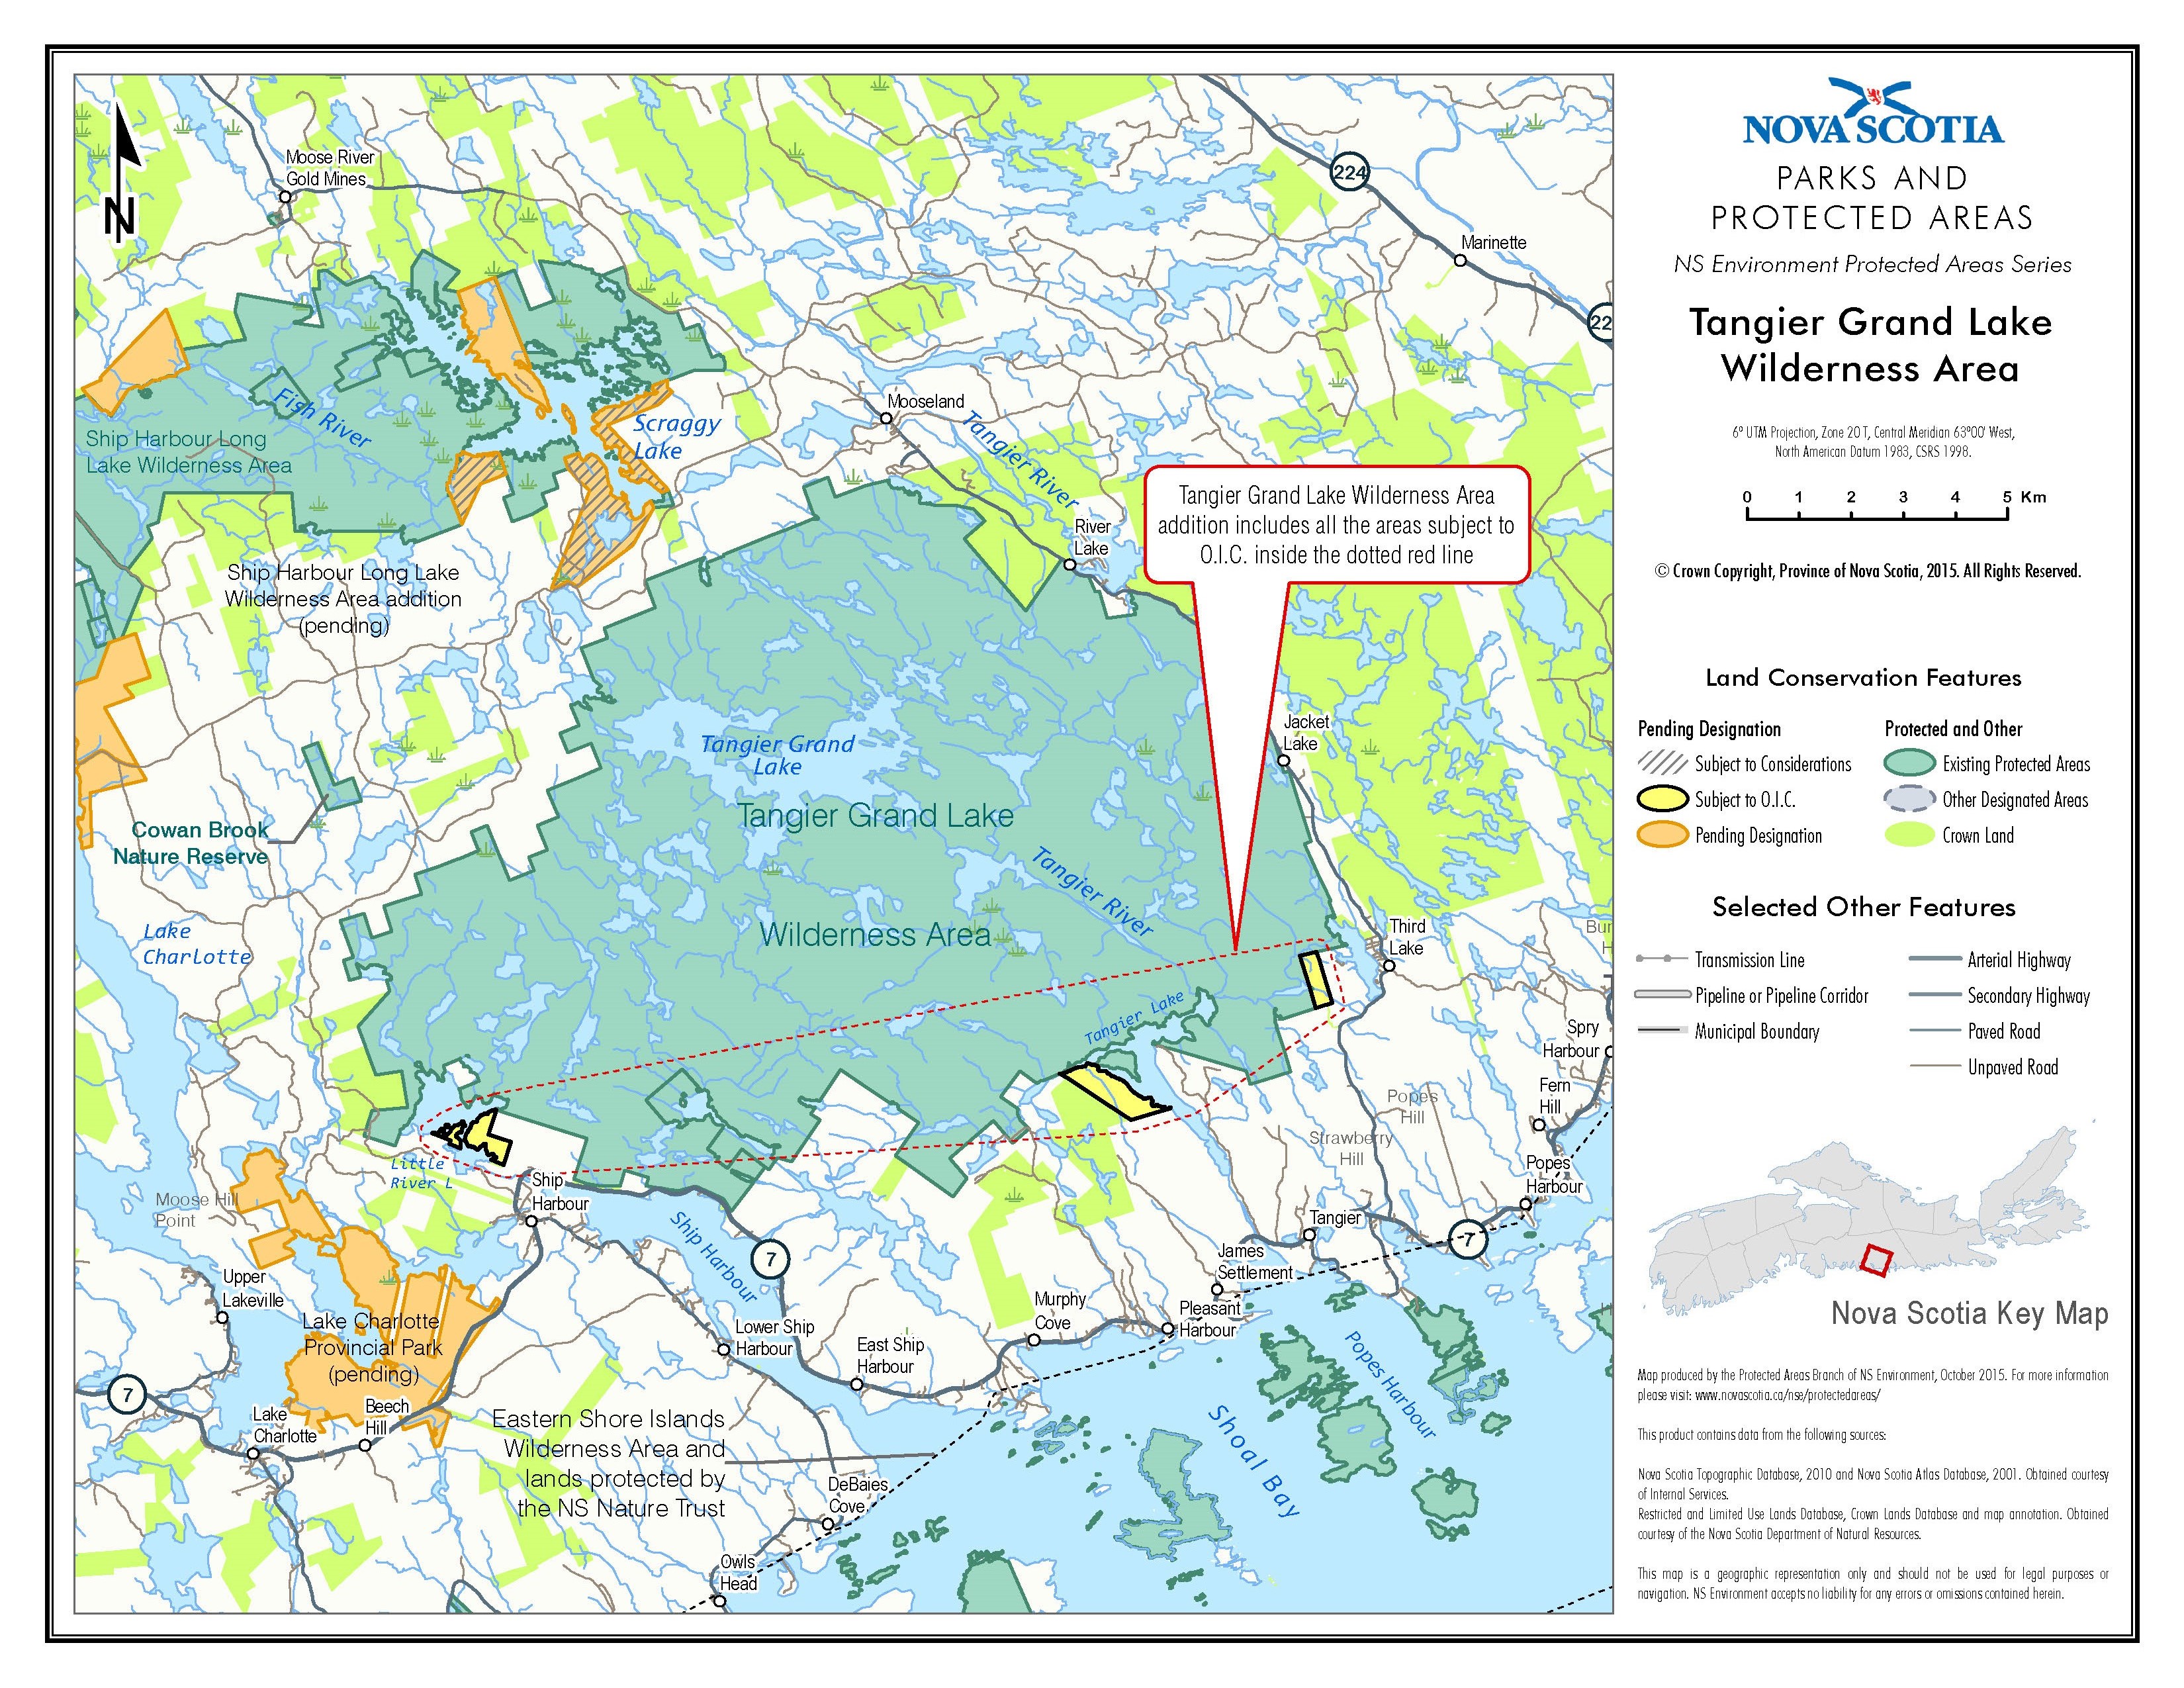 Approximate boundaries of Tangier Grand Lake Wilderness Area